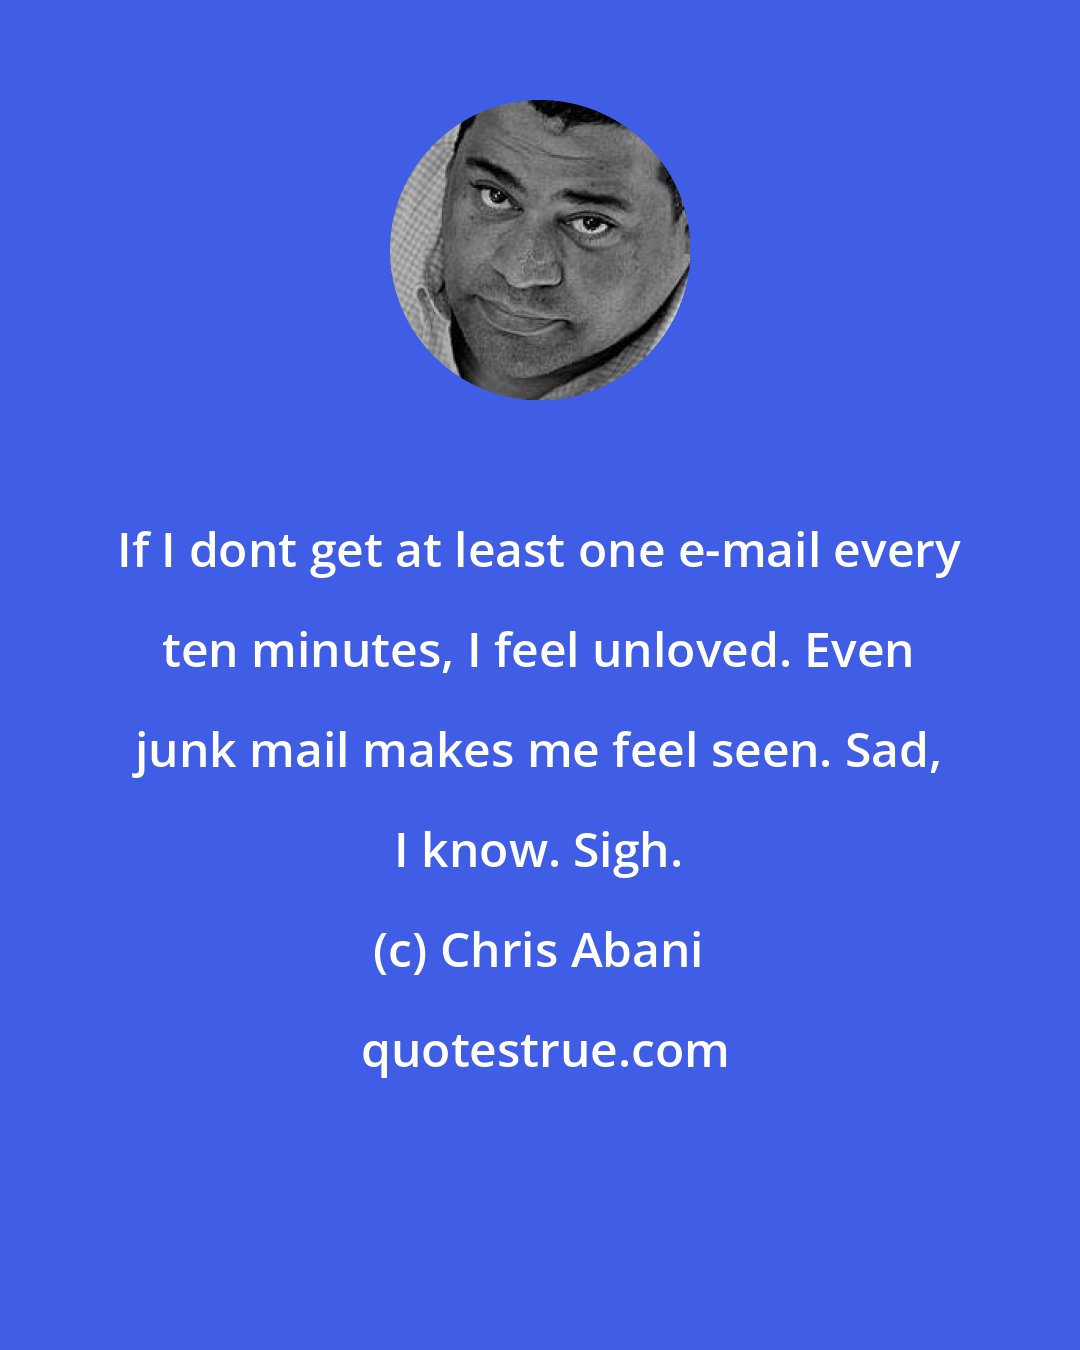 Chris Abani: If I dont get at least one e-mail every ten minutes, I feel unloved. Even junk mail makes me feel seen. Sad, I know. Sigh.